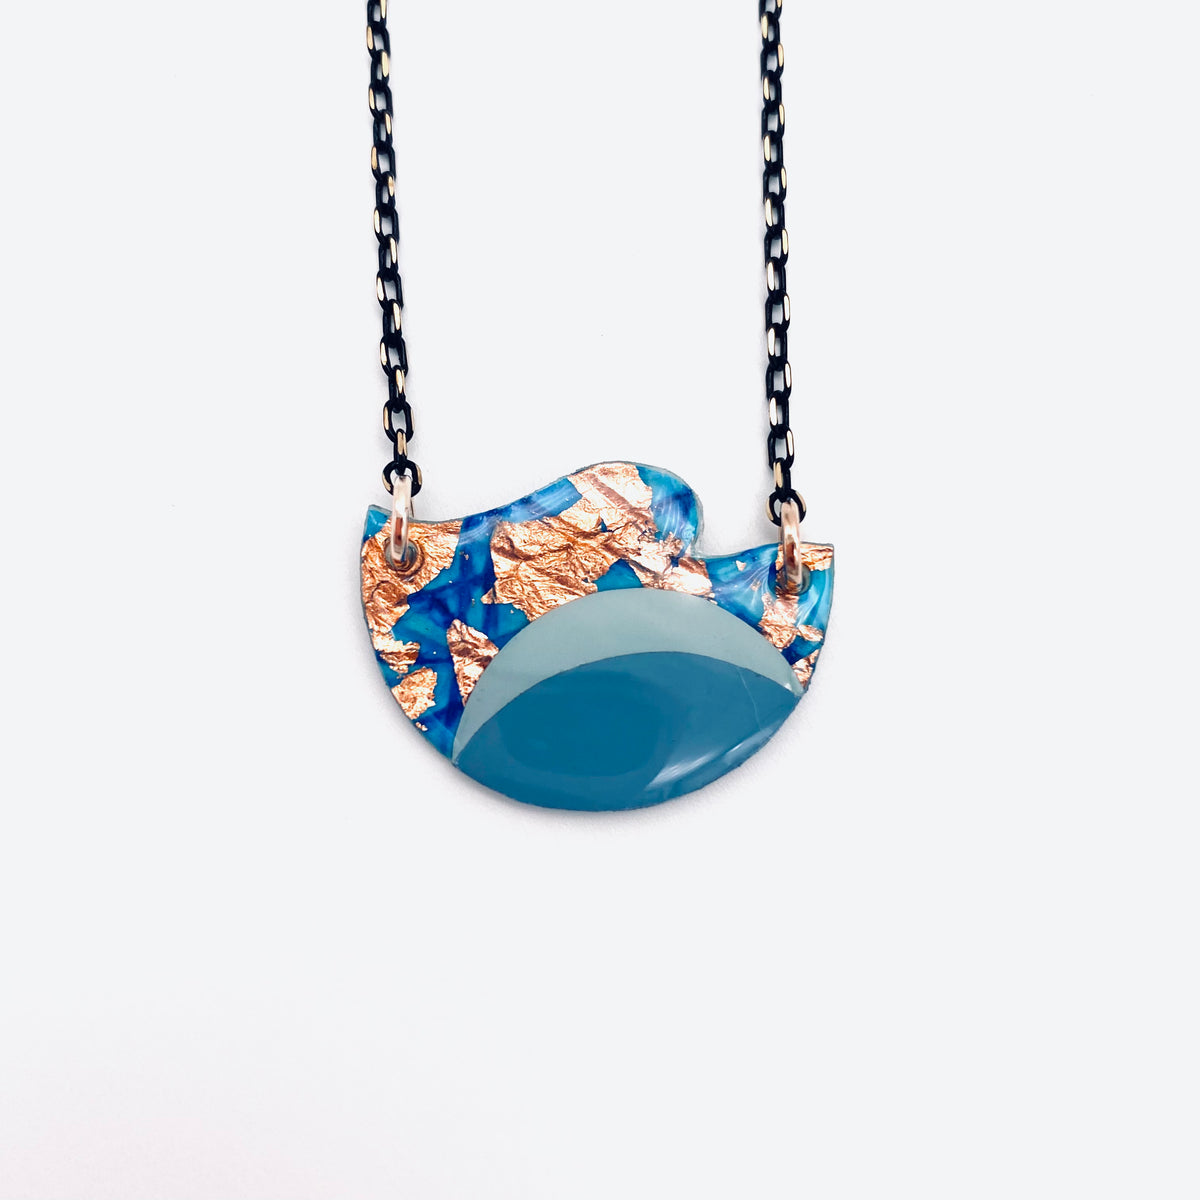 Tonn sgraffito necklace in turquoise/blues/rose-gold